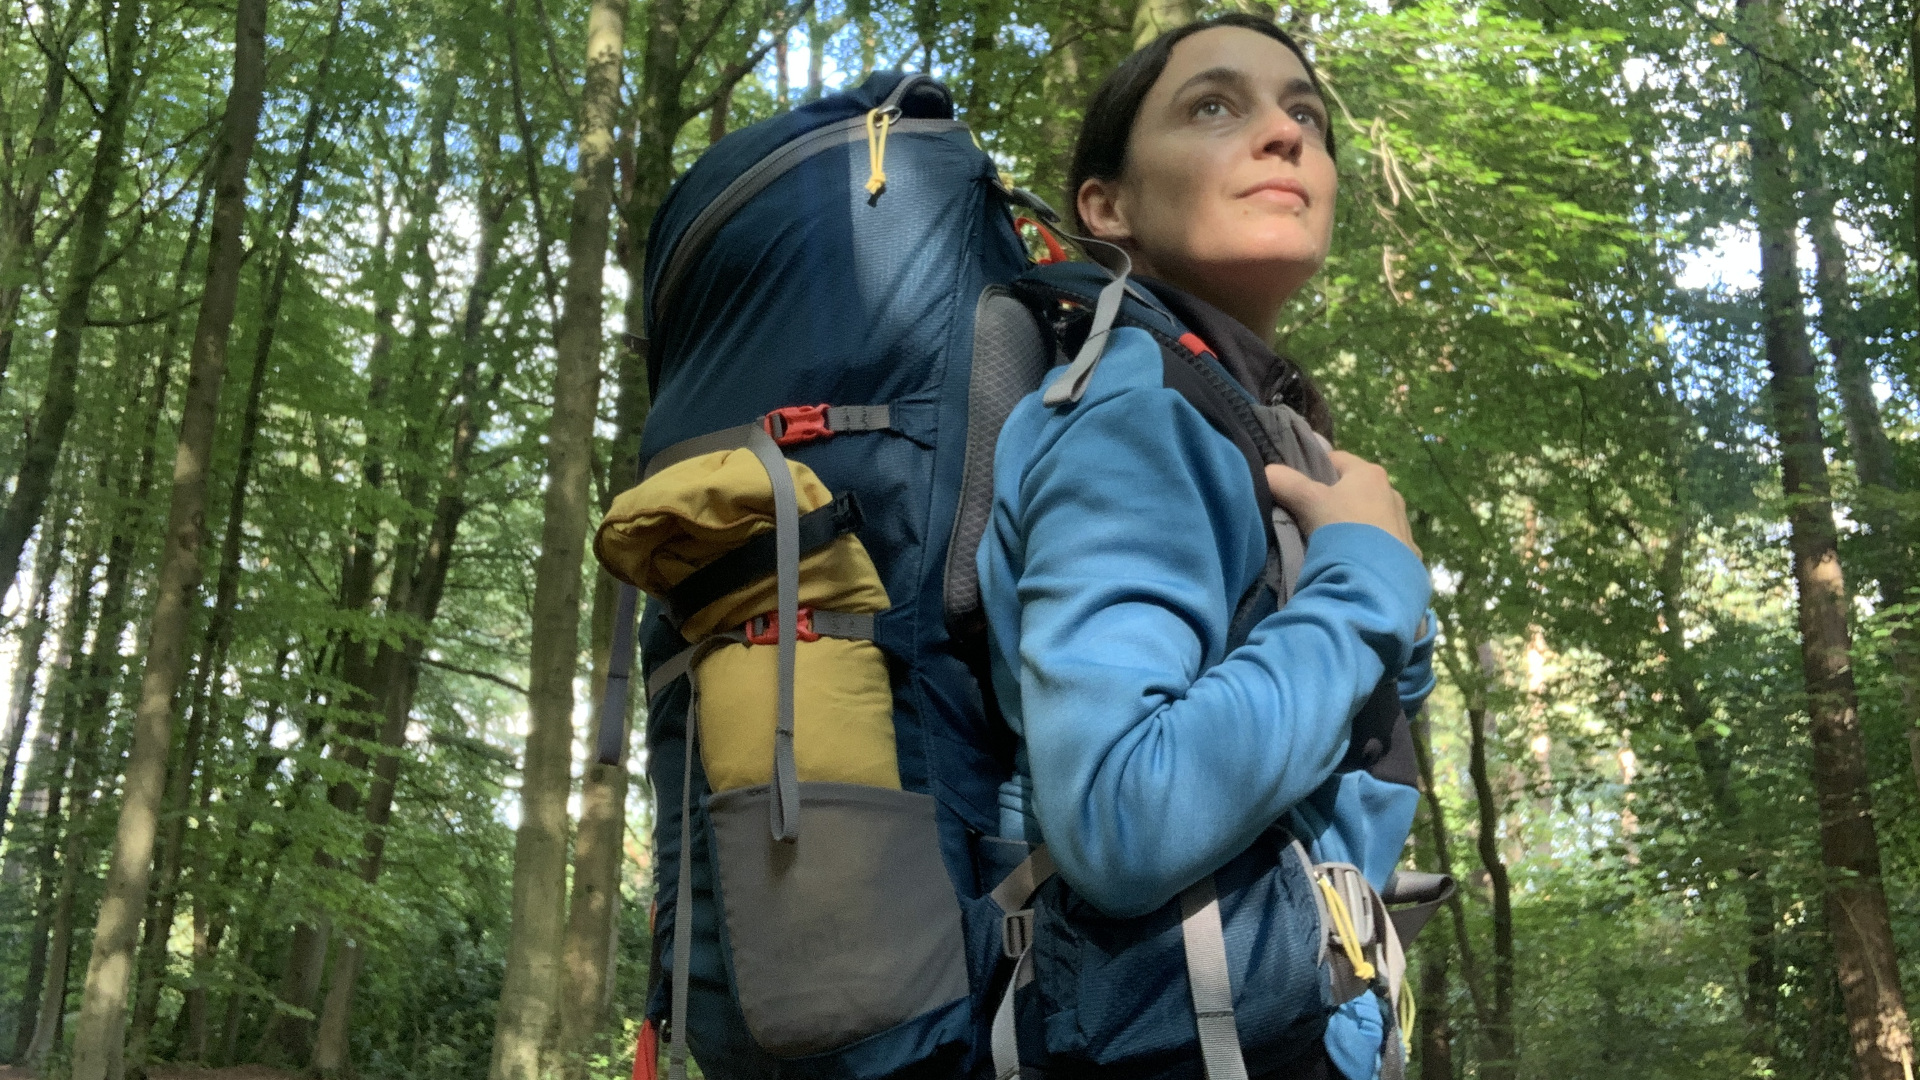 How heavy is too heavy for a hiking backpack? The 20% myth